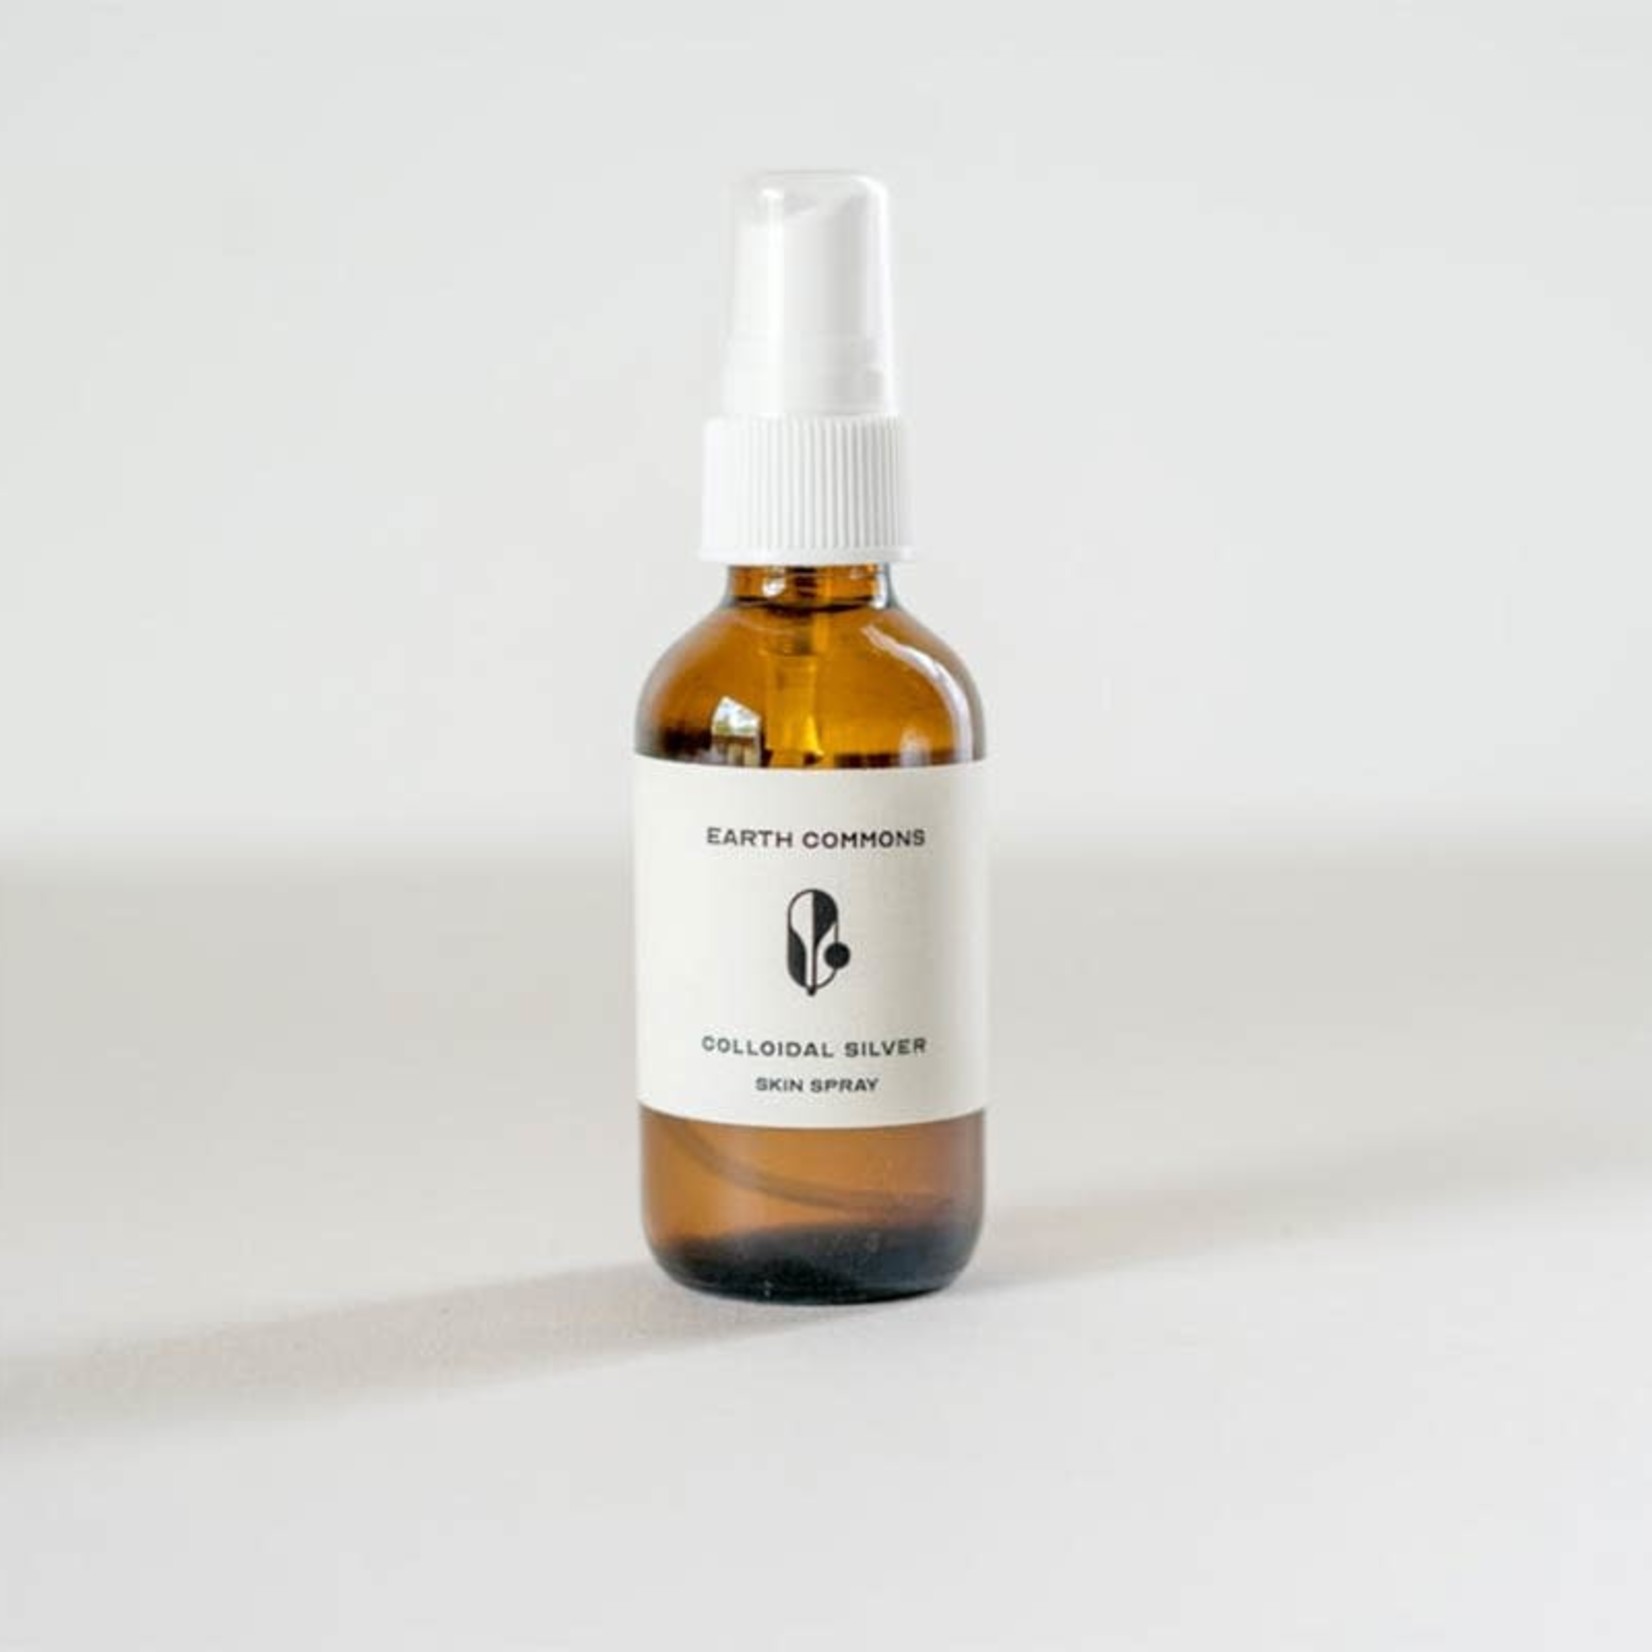 Earth Commons Colloidal Silver Spray by Earth Commons